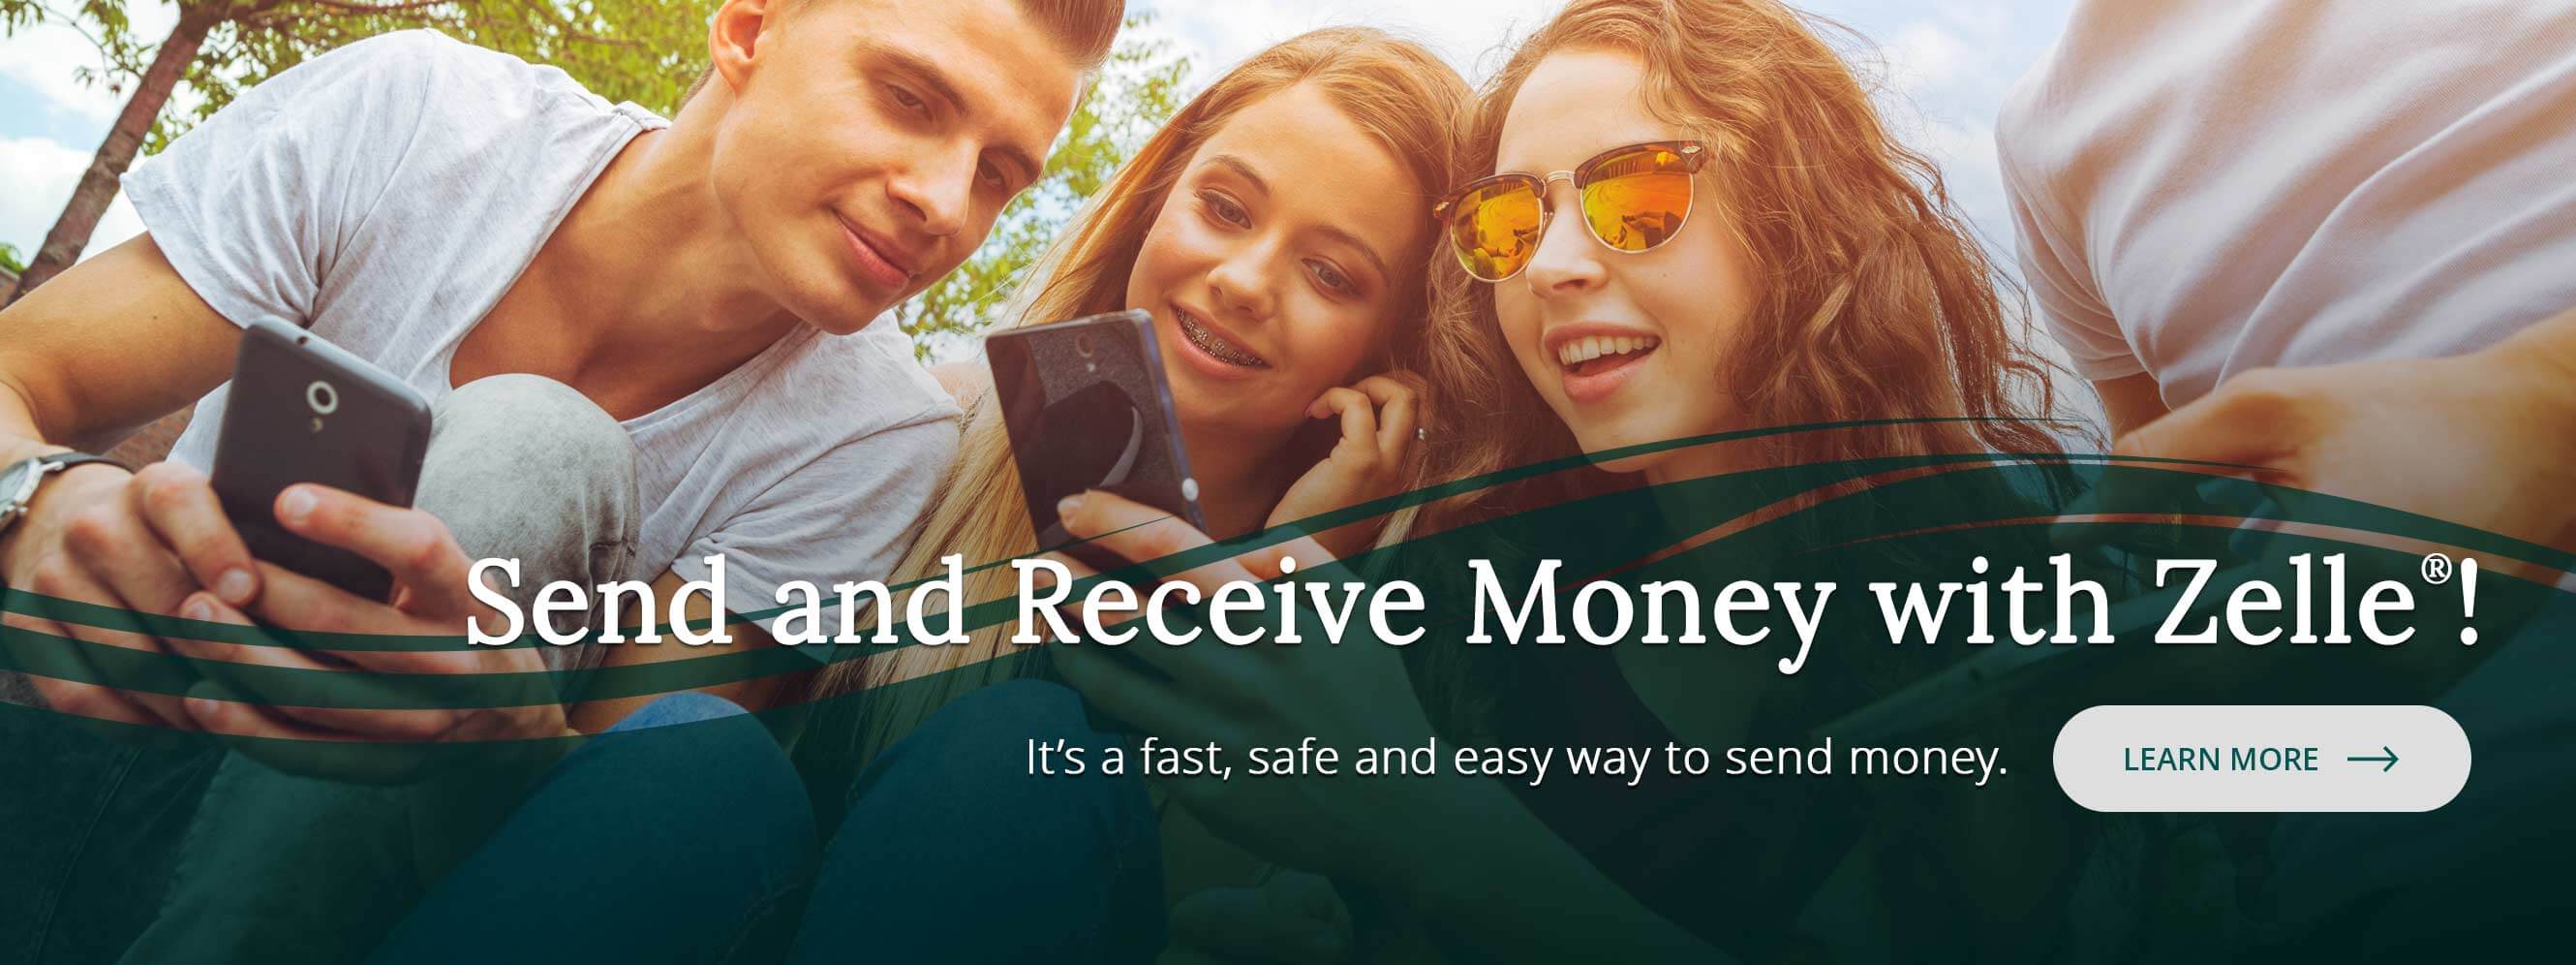 Send and Receive Money with Zelle! It's a fast, safe and easy way to send money. Learn More.